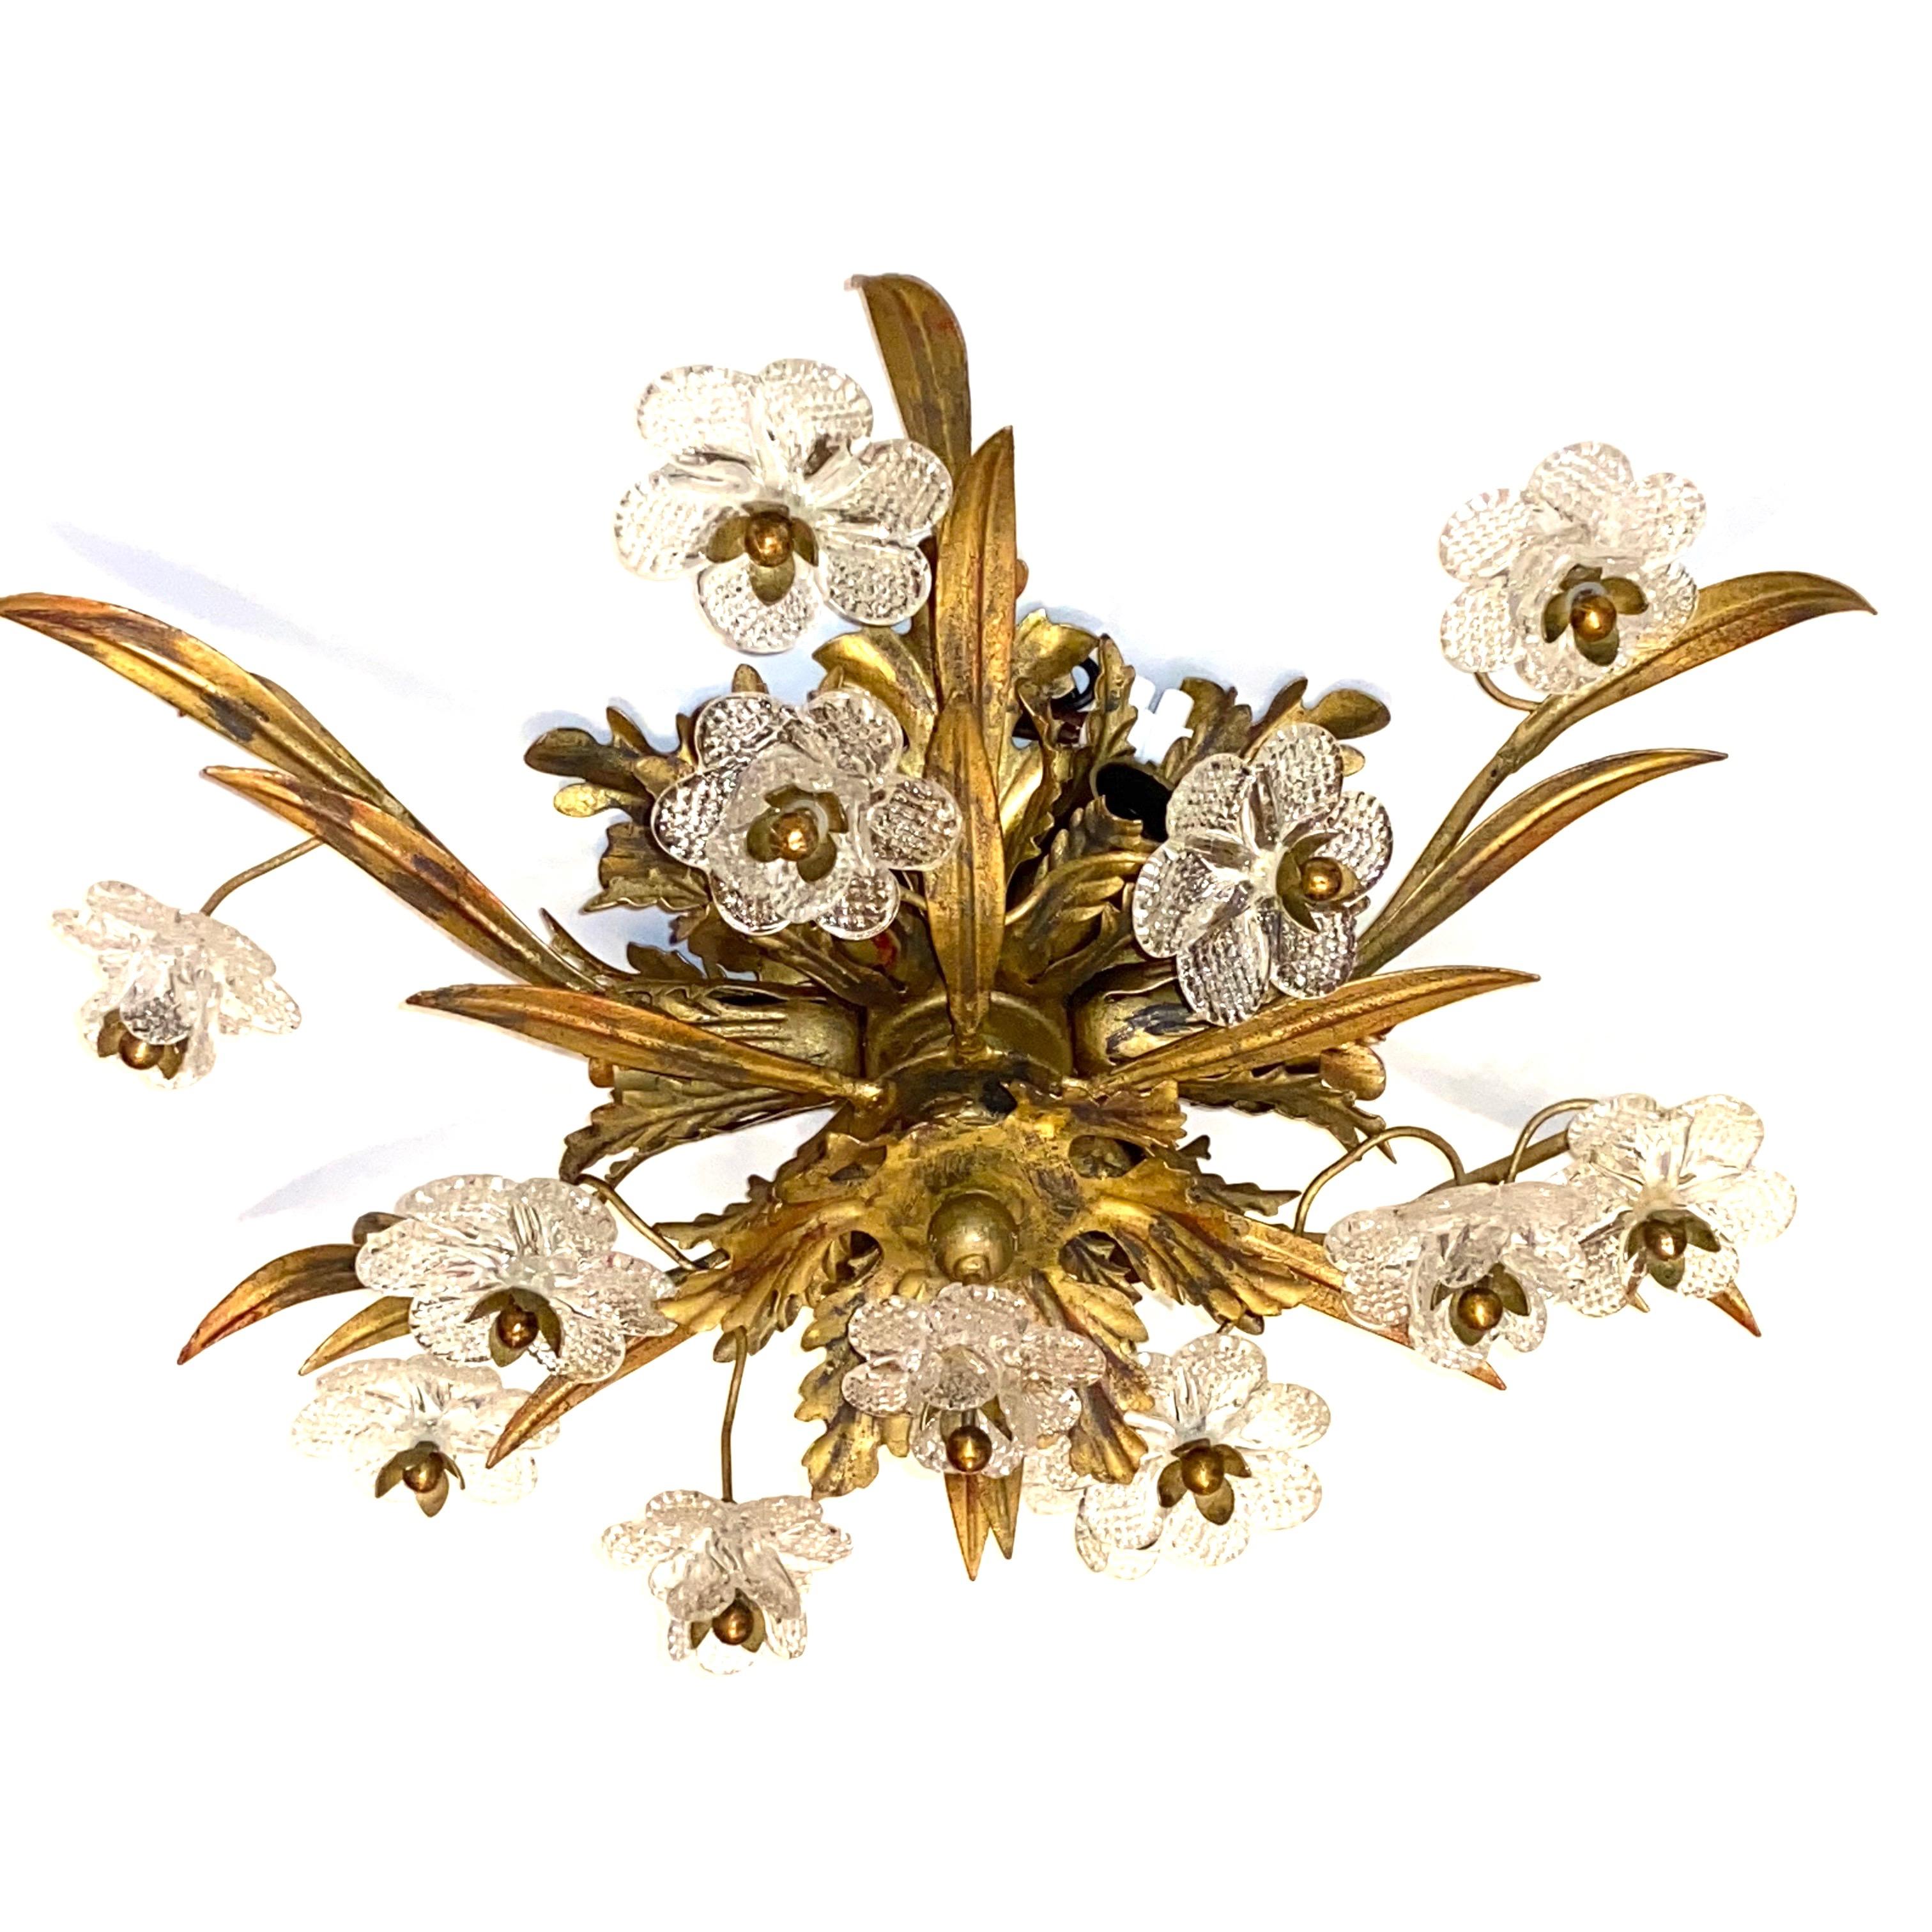 Add a touch of opulence to your home with this charming flushmount. Perfect gilt metal leafs with handmade Murano glass flowers to enhance any chic or eclectic home. We'd love to see it hanging in an entryway as a charming welcome home. Built in the